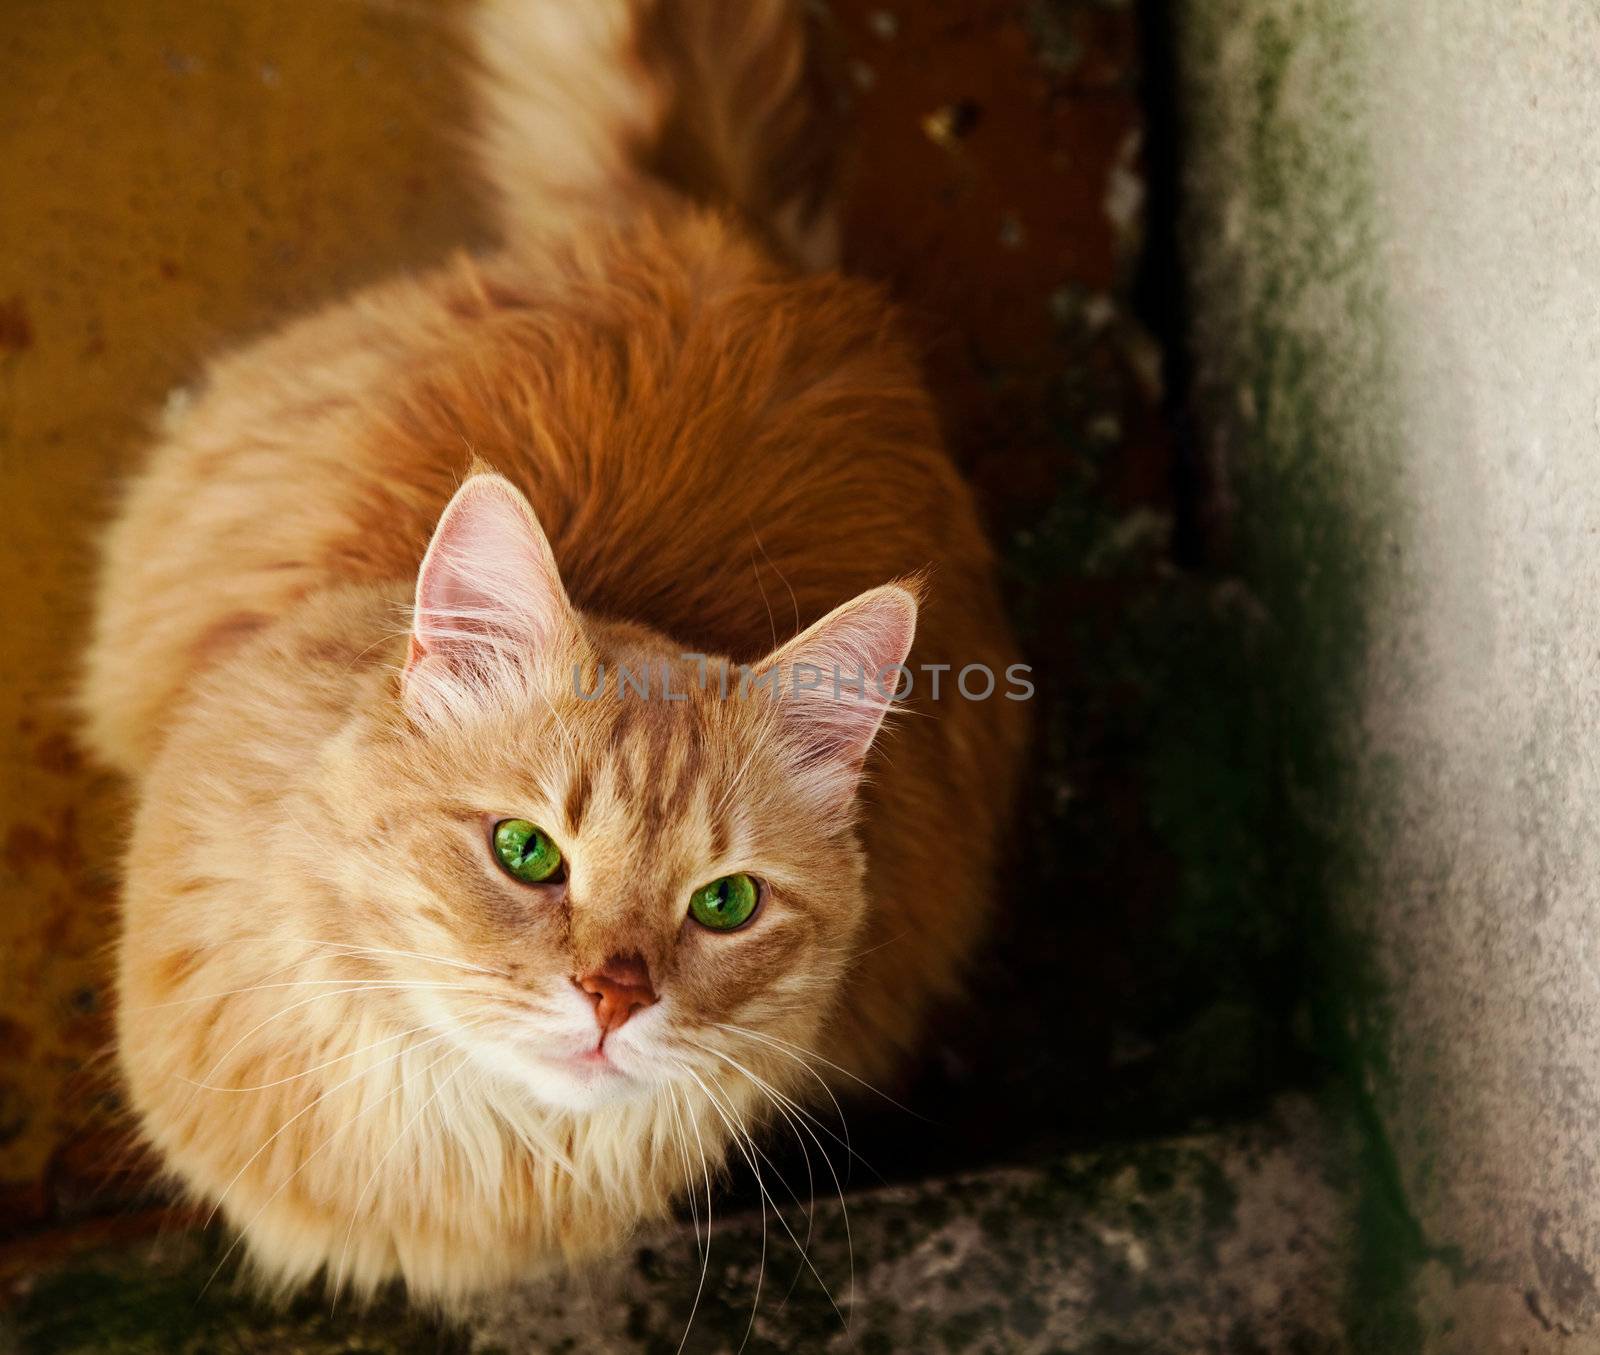 Homeless cat with green eyes staring at people. by fxquadro